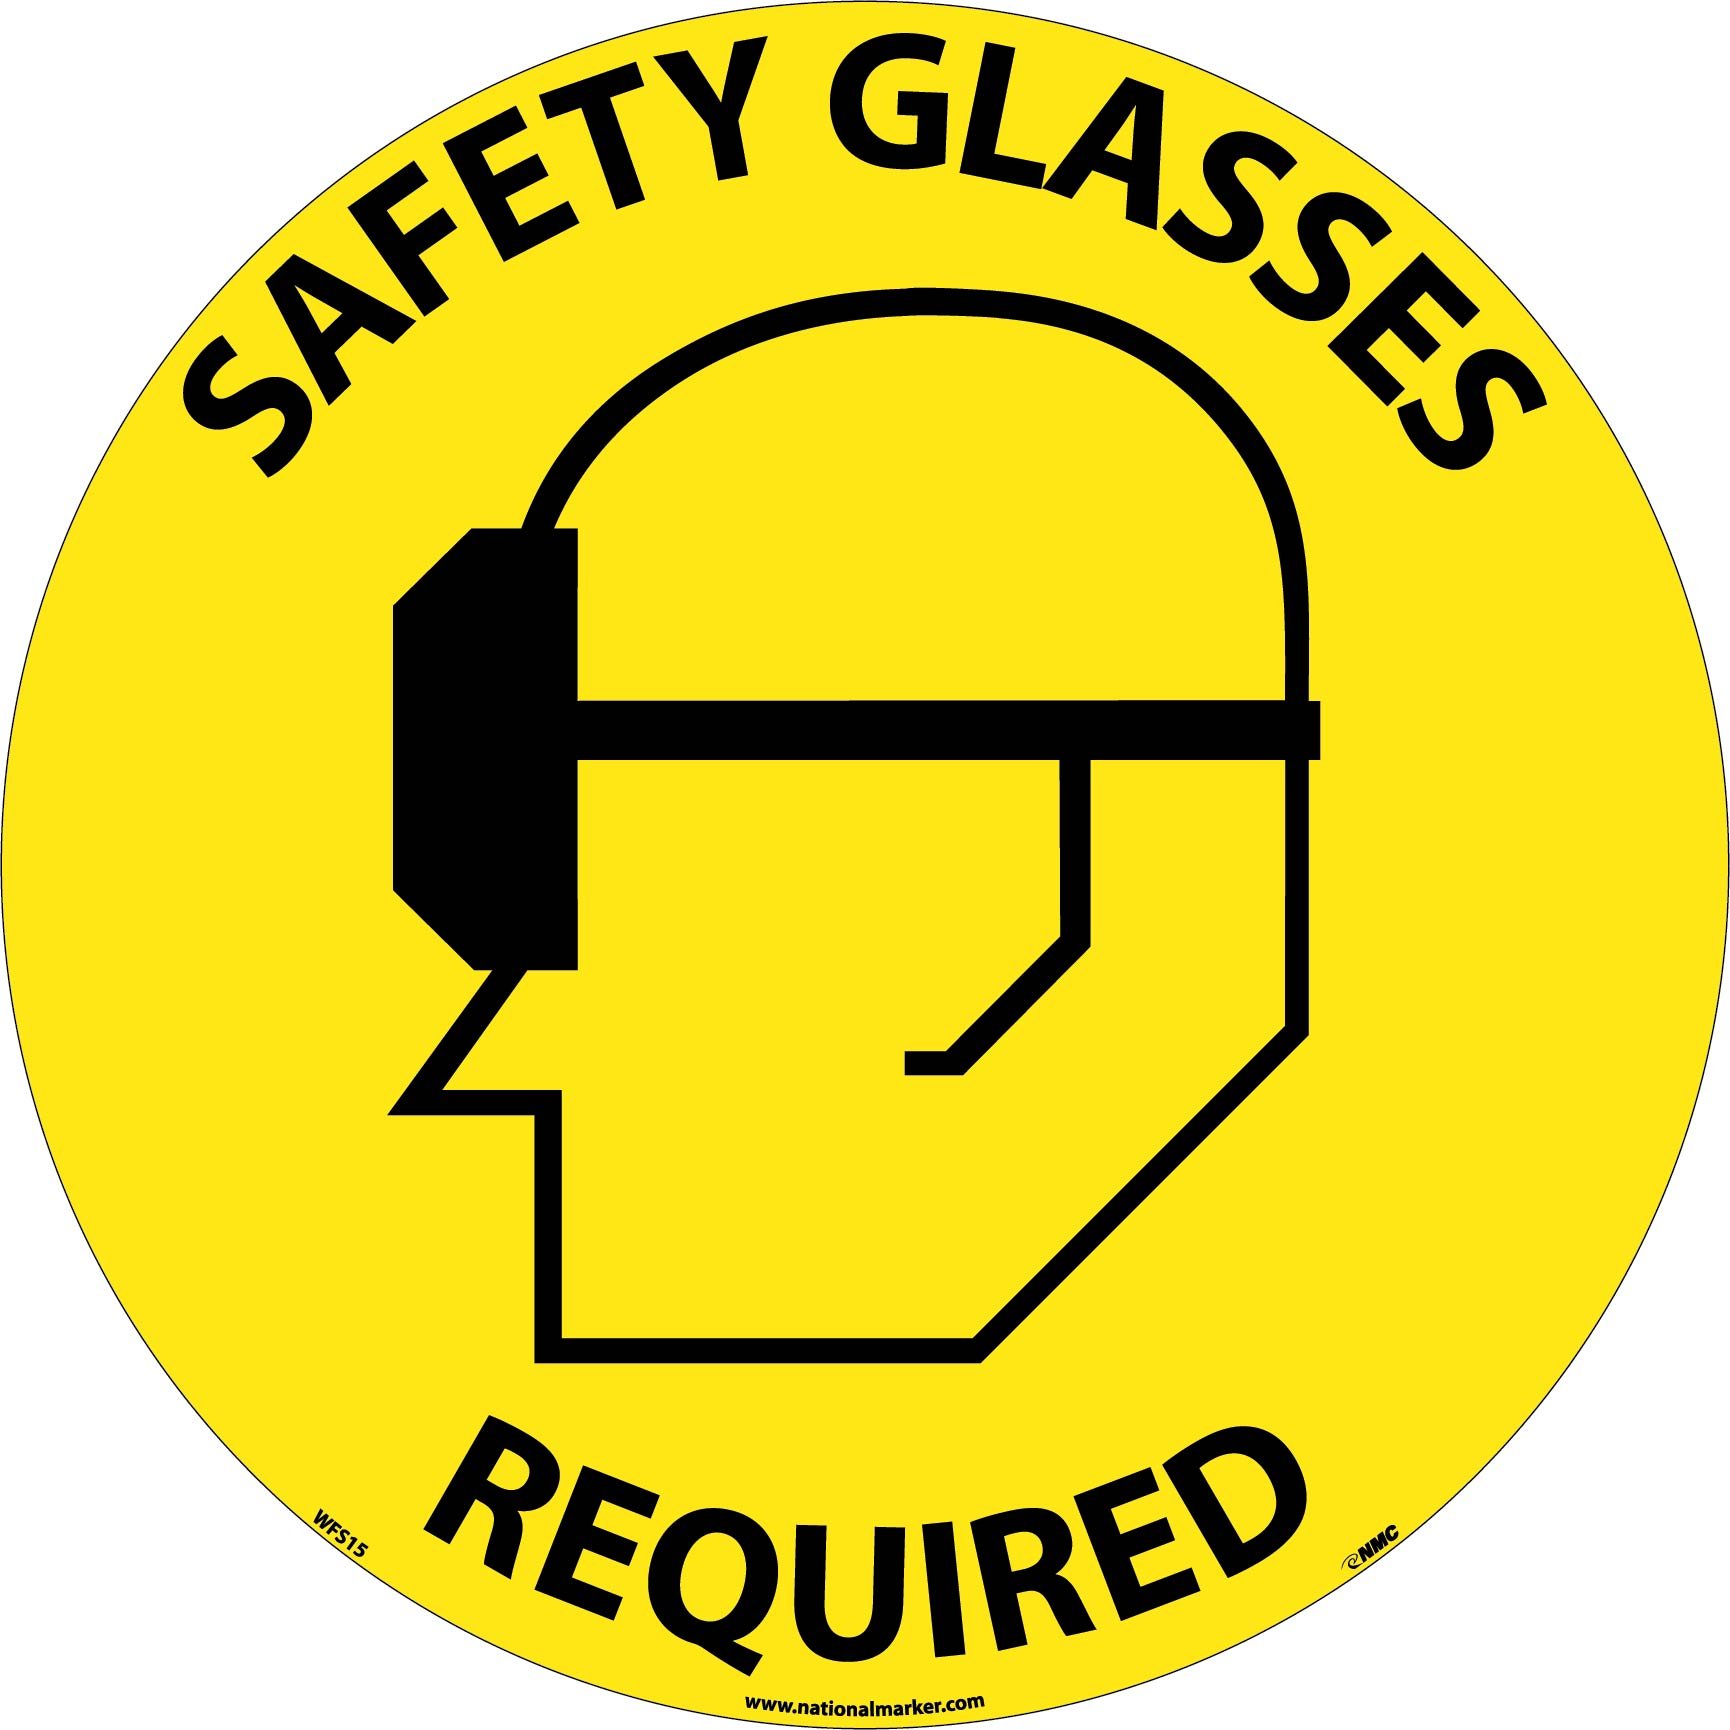 clipart on safety - photo #31